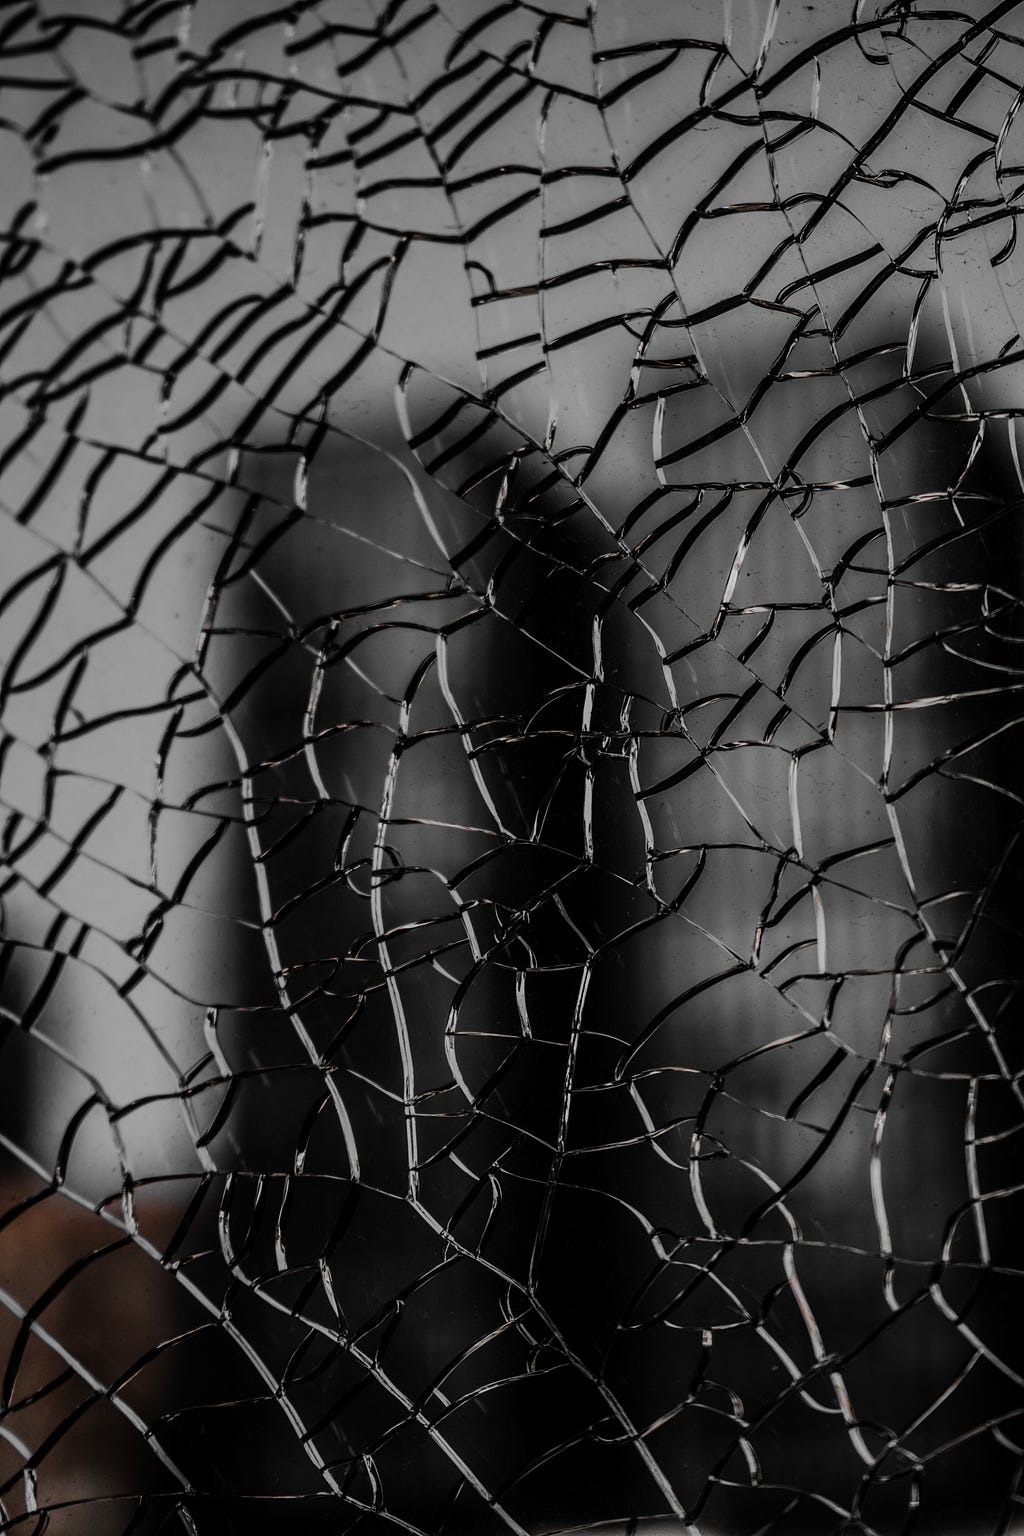 Image of a broken mirror with multiple cracks